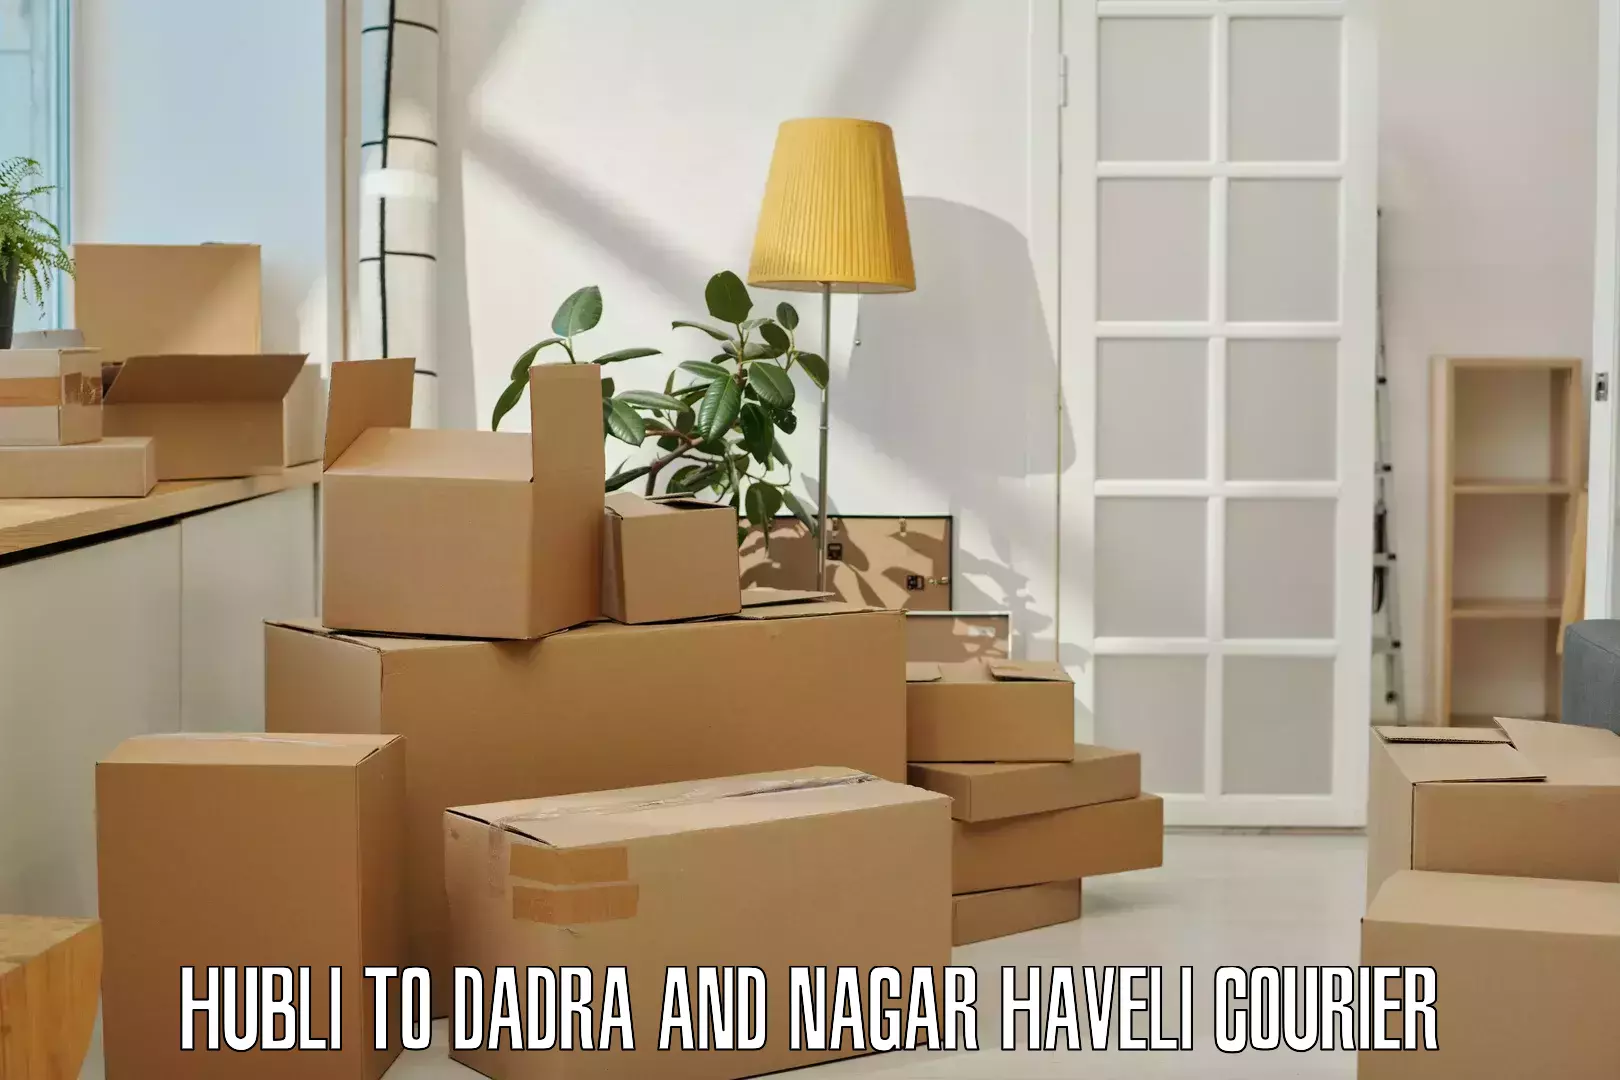 User-friendly delivery service Hubli to Dadra and Nagar Haveli